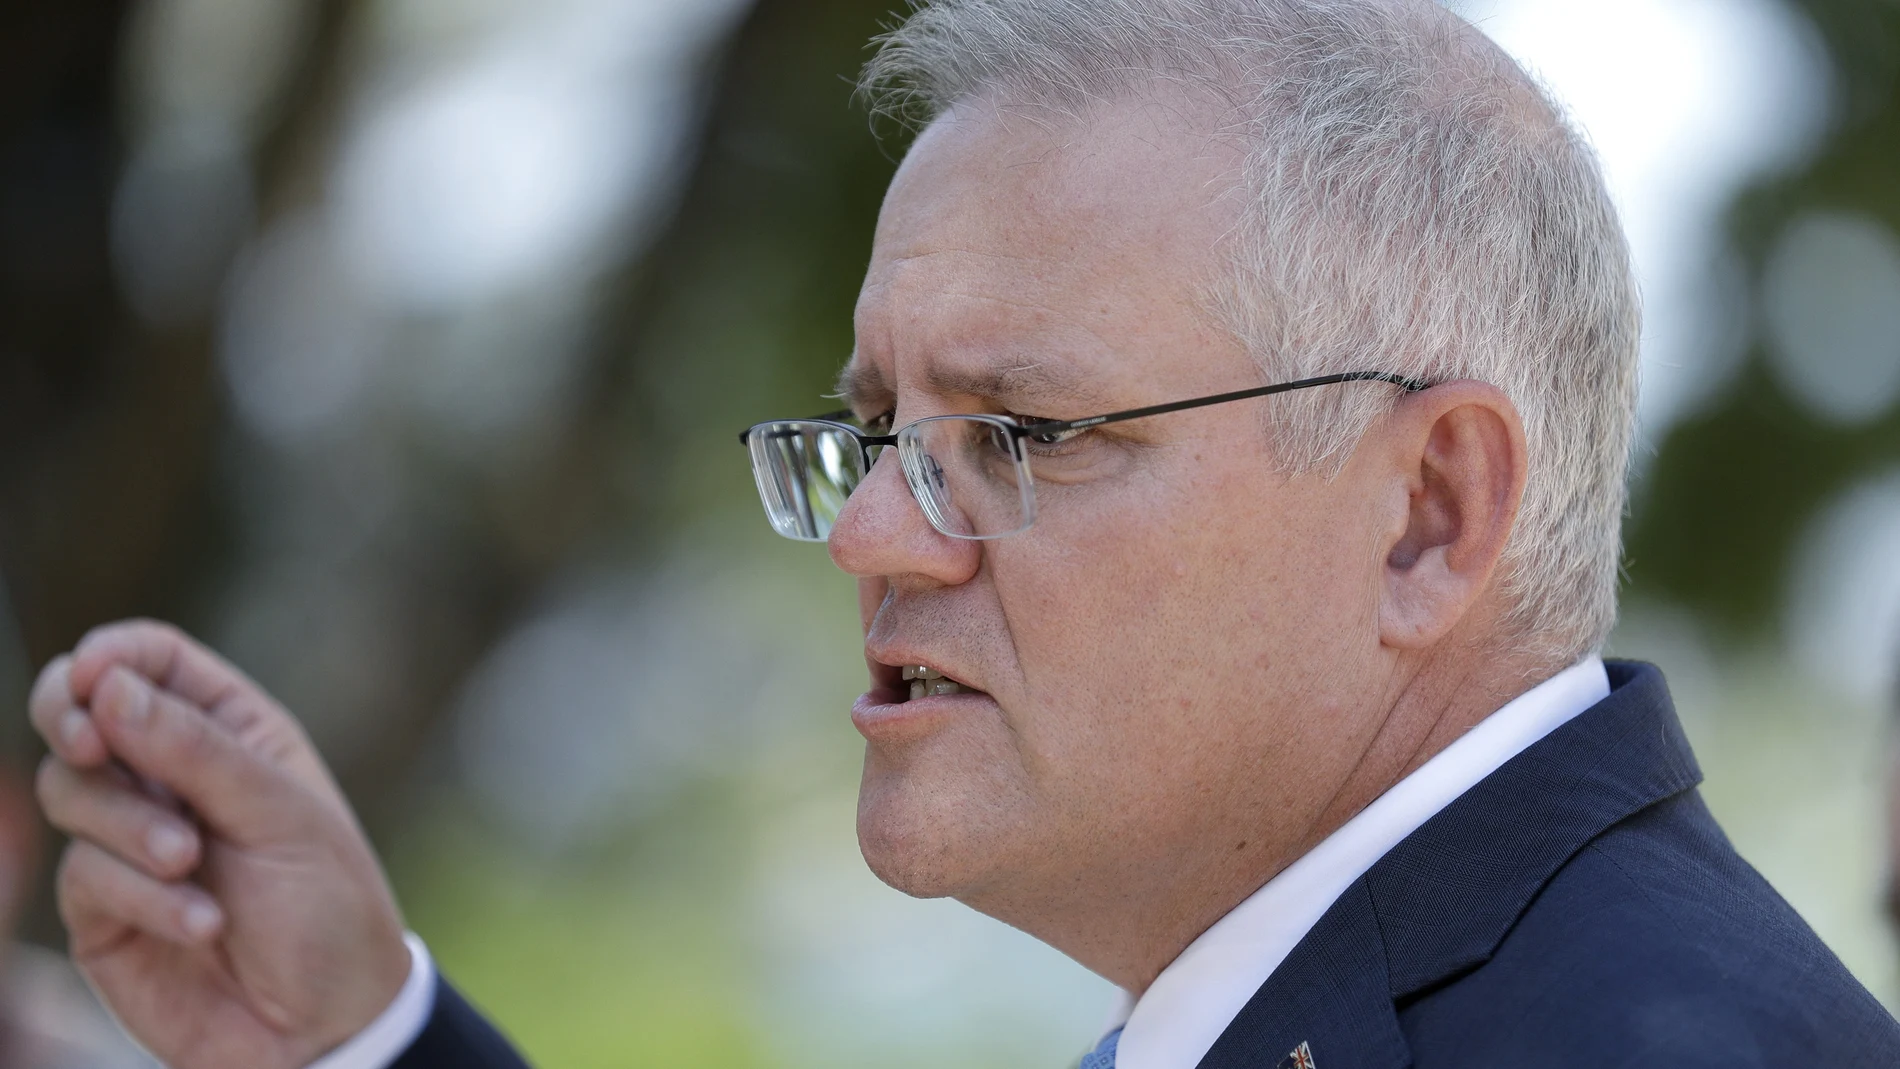 Australia's Prime Minister Scott Morrison speaks to the media in Sydney, Monday, March 1, 2021. Morrison stood by an unnamed Cabinet minister against calls for him to step down from office over an allegation that he raped a 16-year-old girl more than 30 years ago. (AP Photo/Rick Rycroft)